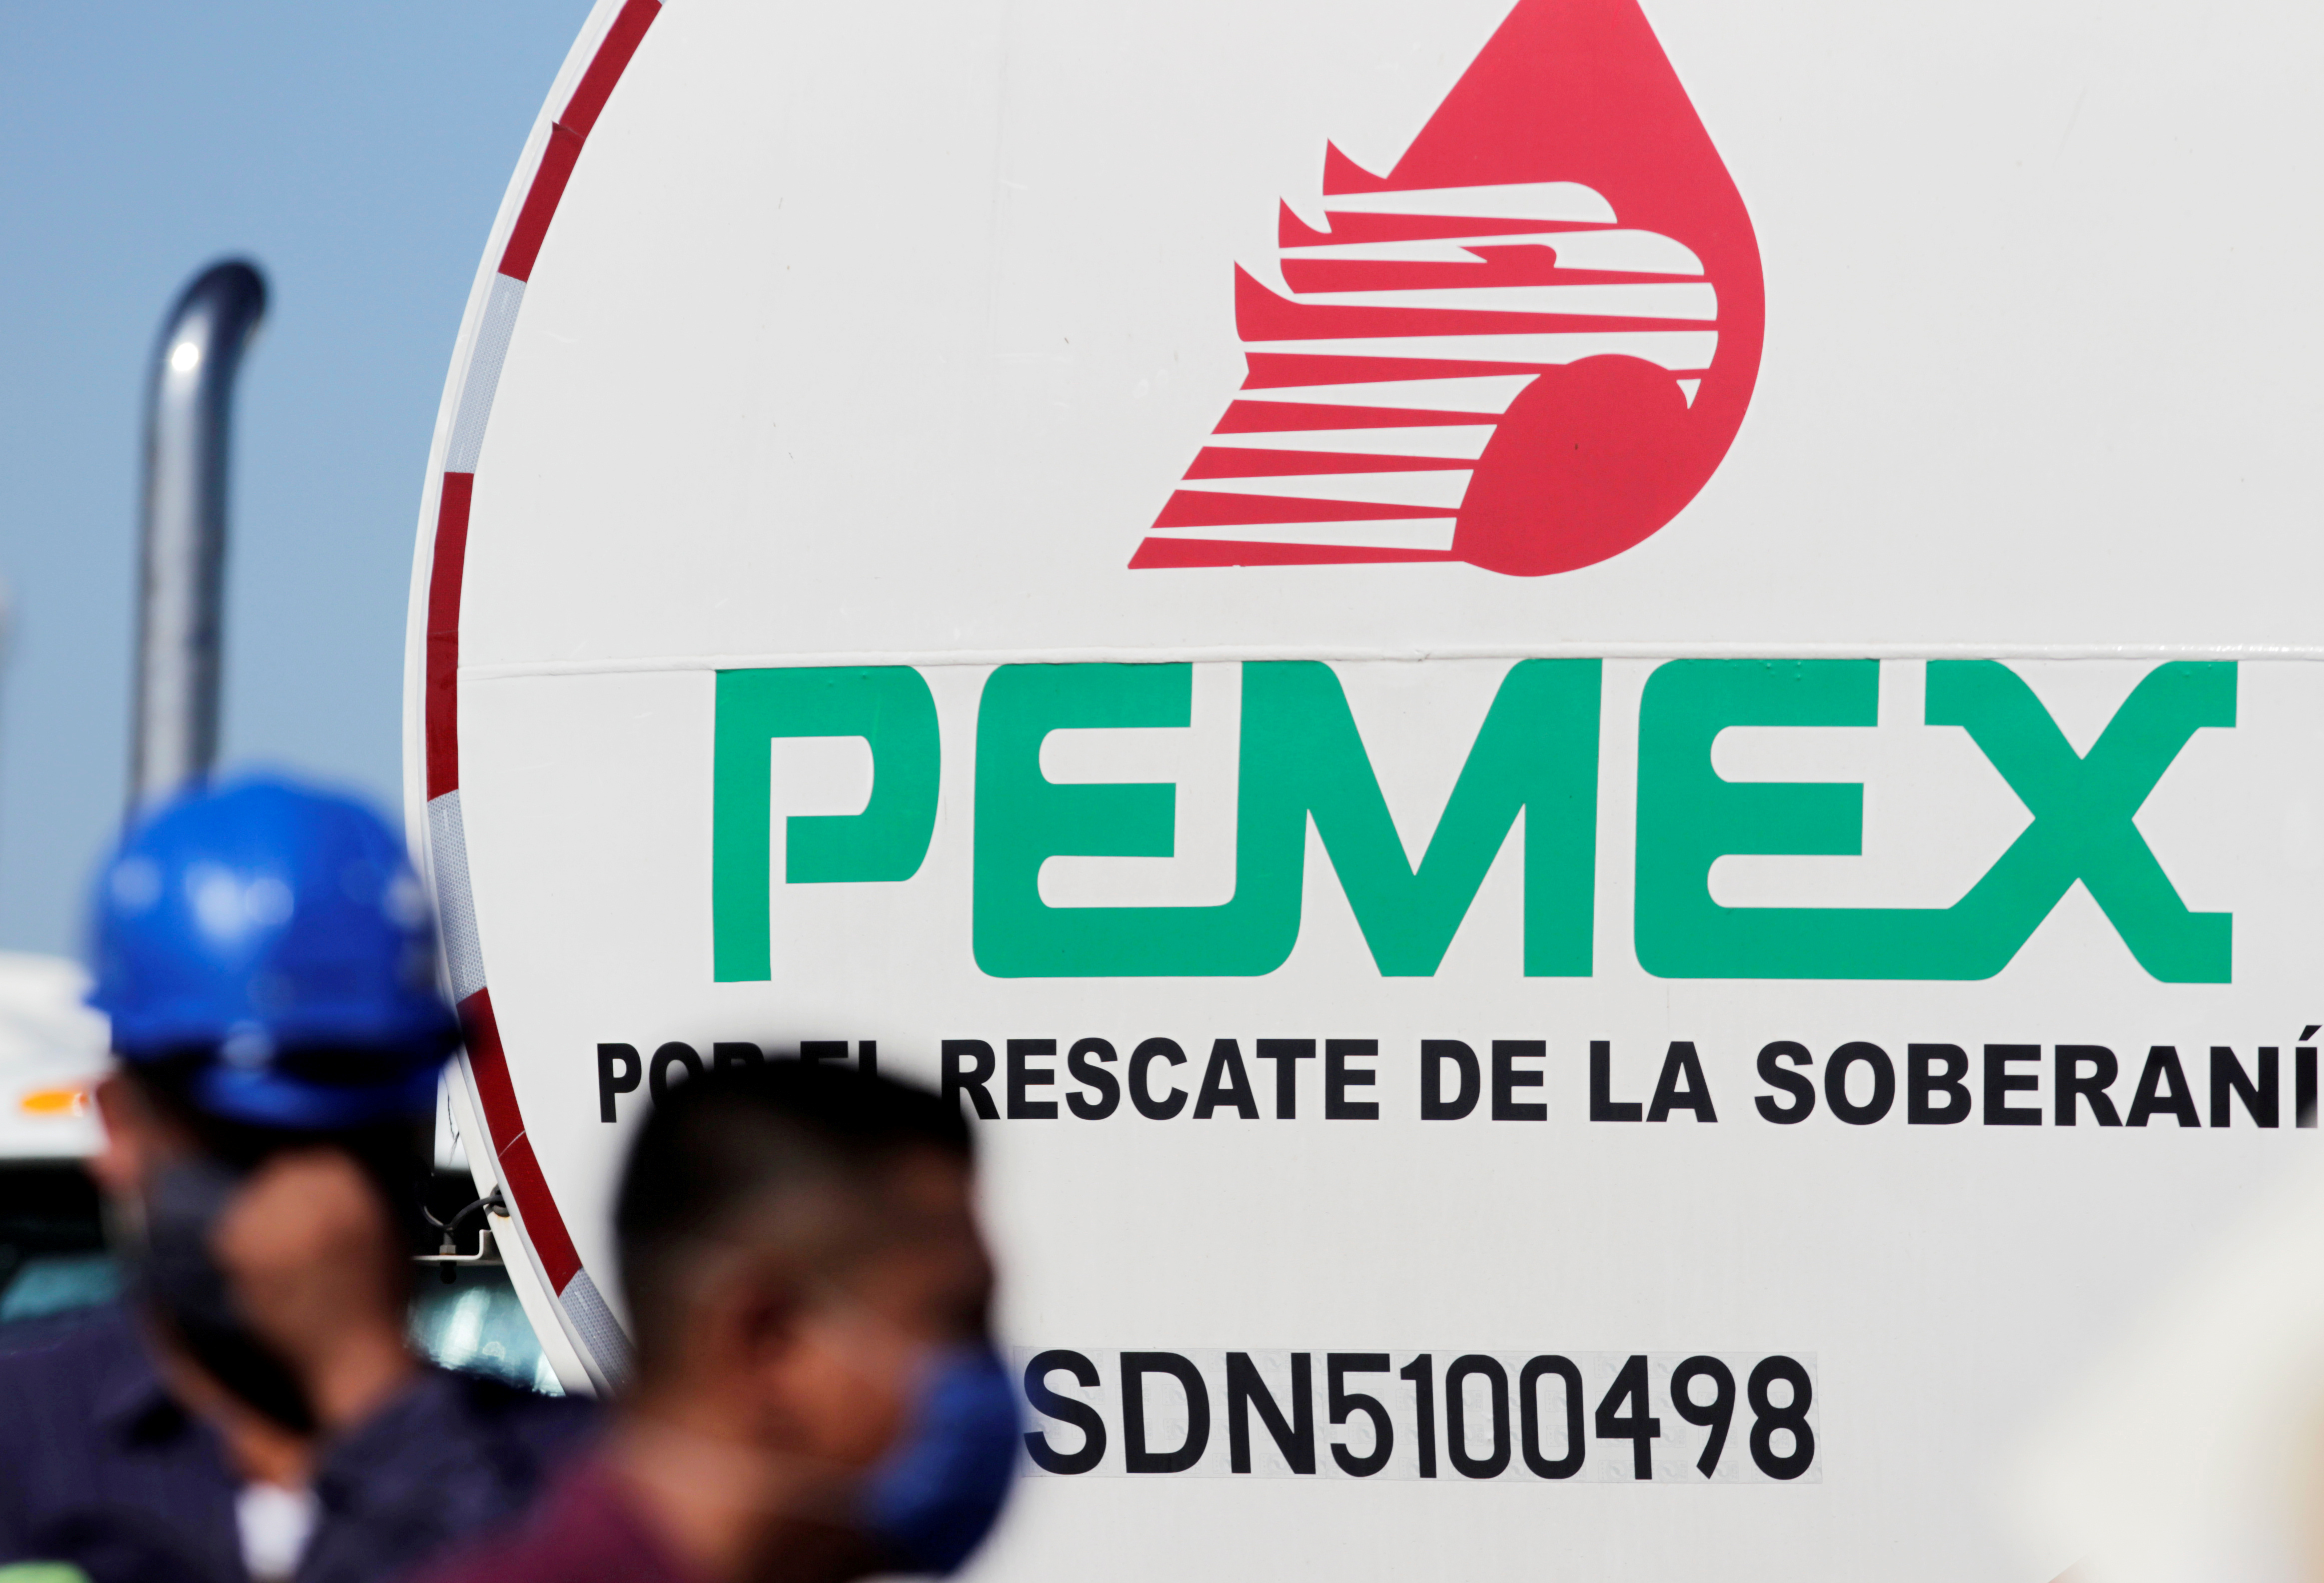 A Pemex logo is pictured during a visit by Mexico's president, Andres Manuel Lopez Obrador, to Cadereyta refinery, Monterrey